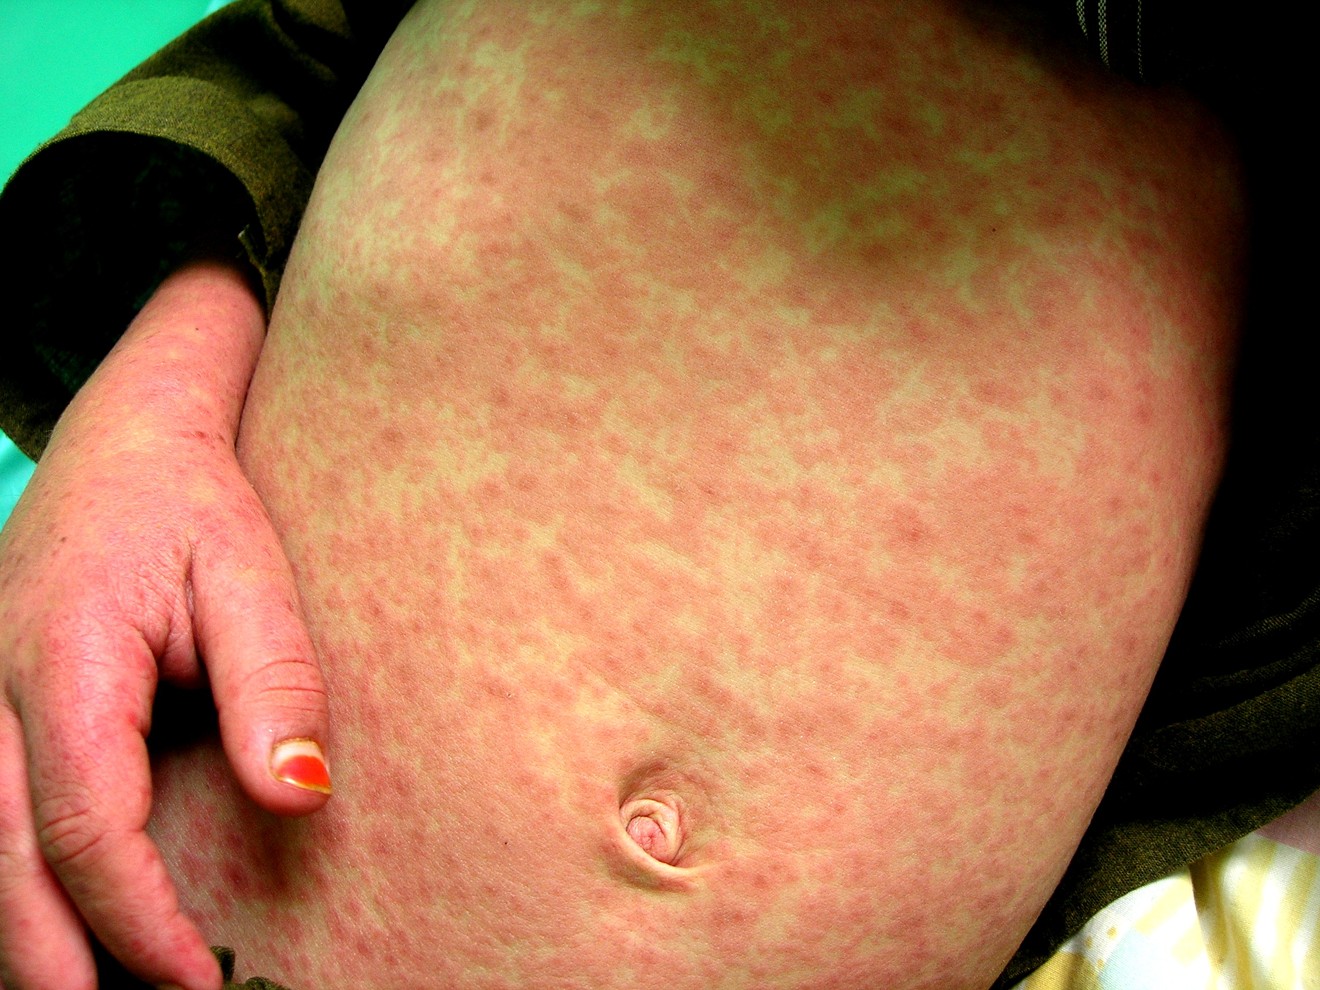 Three unvaccinated children tested positive for measles last week.